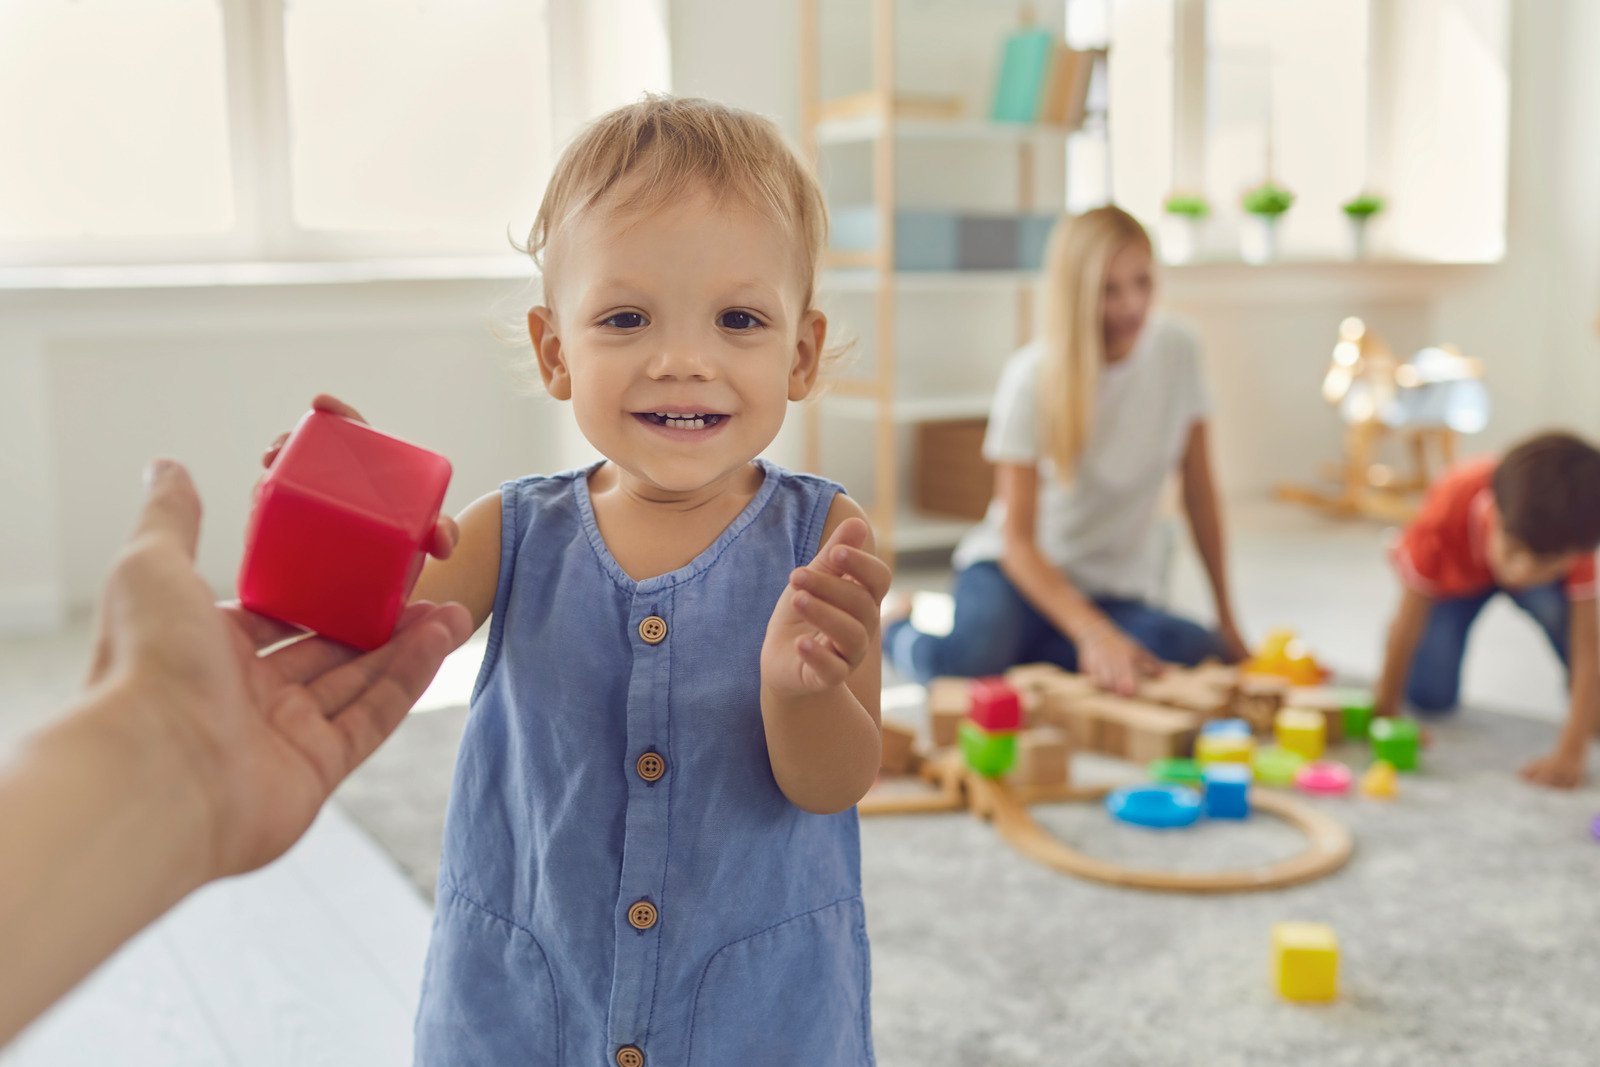 Happy Little Boy Gives a Red Plastic Cube in the Hands of His Dad in a Bright Room.